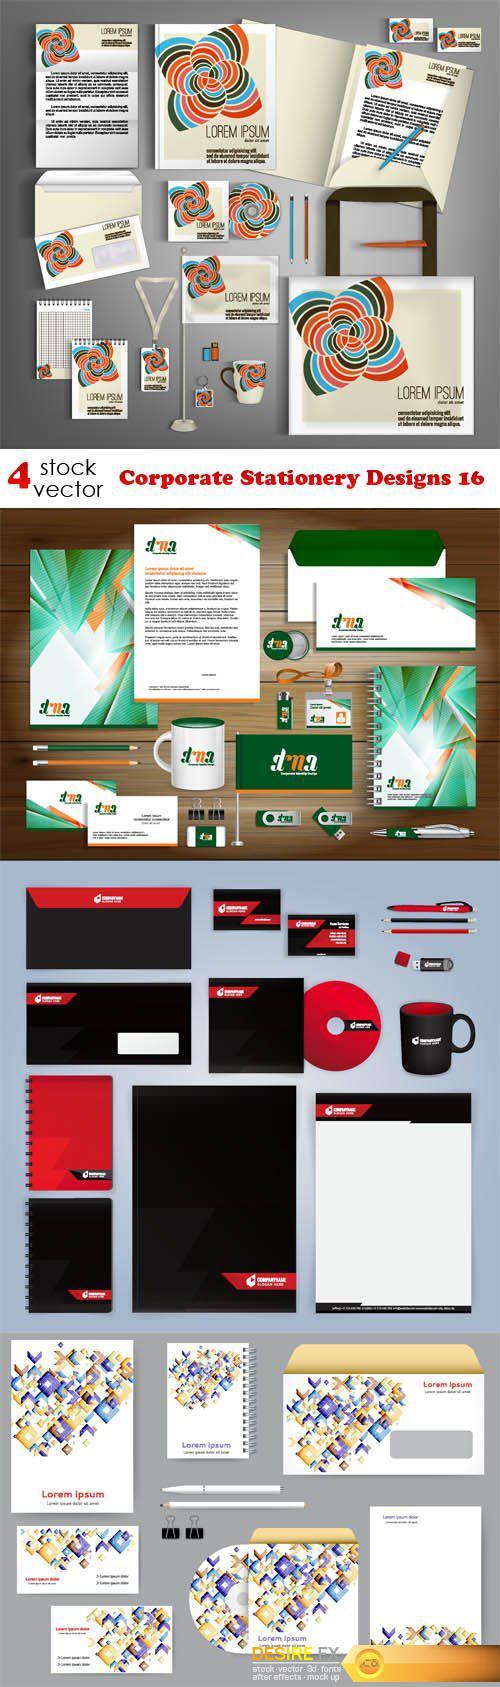 Vectors - Corporate Stationery Designs 16